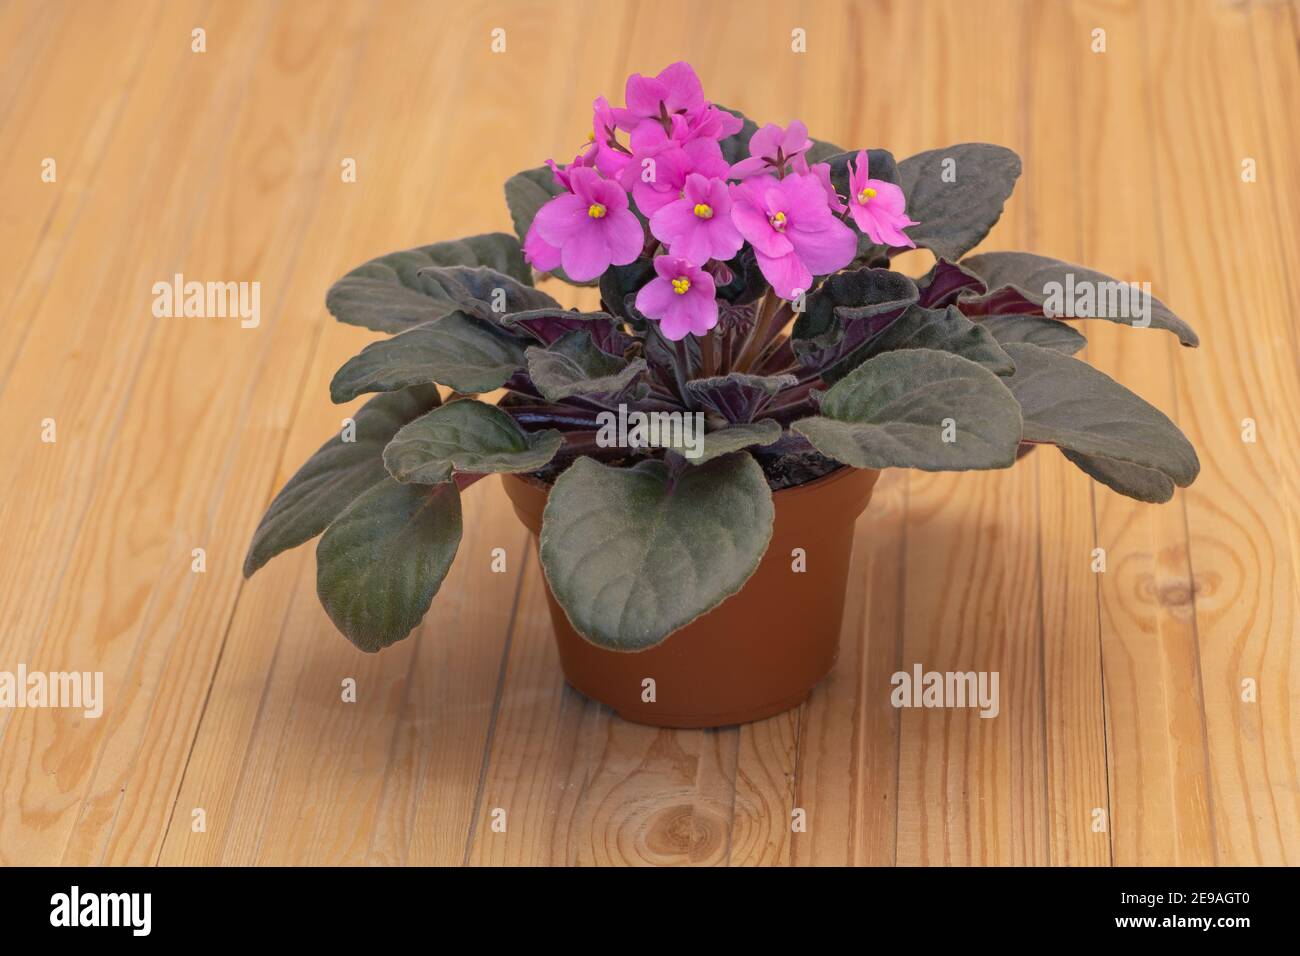 Beautiful African violet with pink flowers close up. How to grow African violets at home concept. Stock Photo